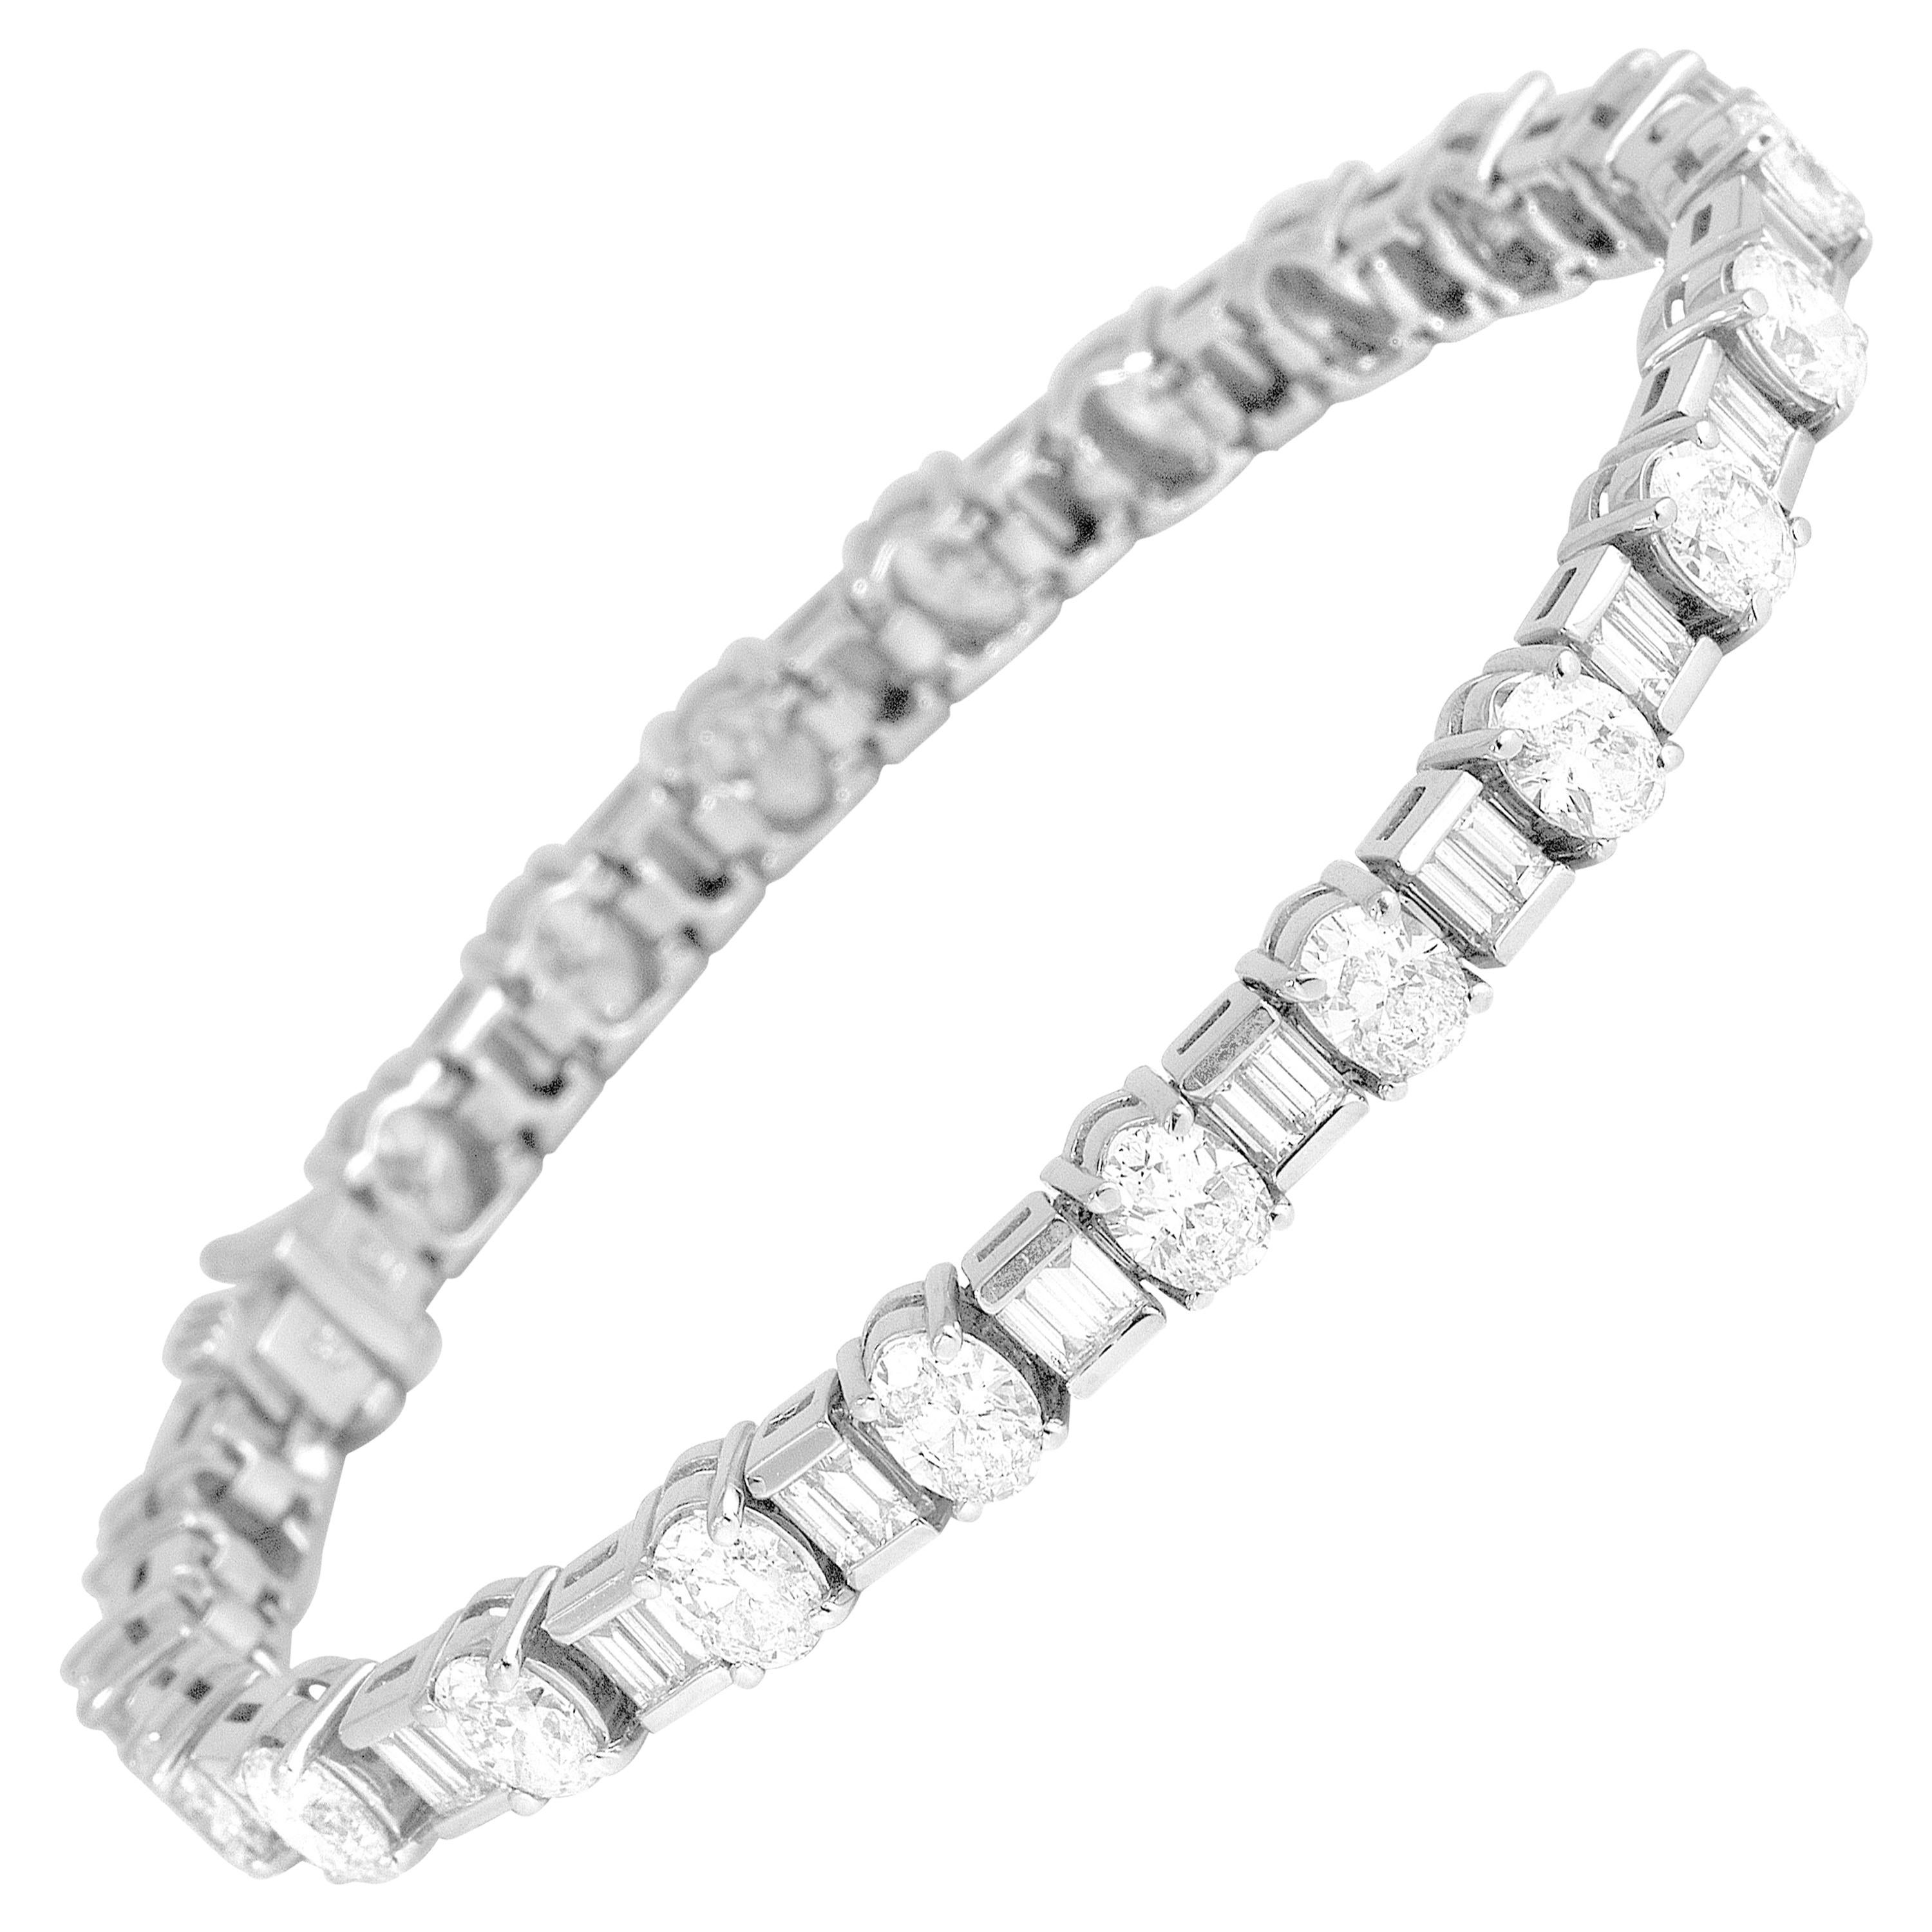 12.02 Carat Mixed Cut Natural Diamond Tennis Bracelet in 18K White Gold ref255 For Sale